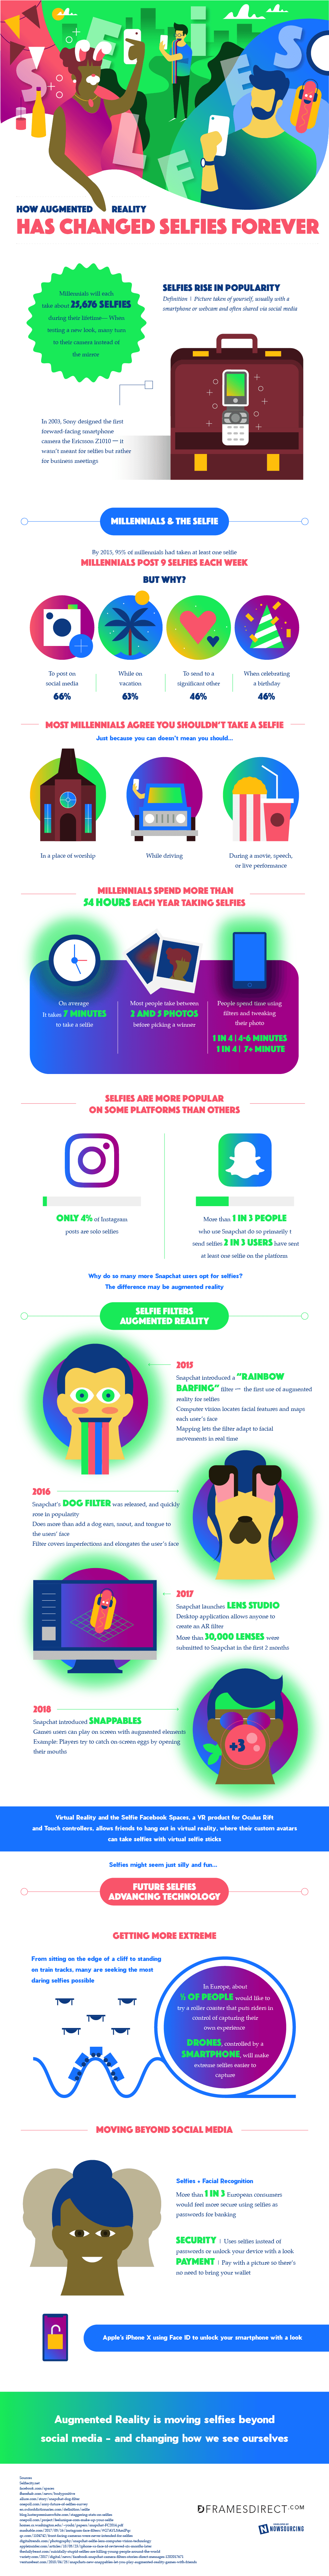 Augmented Reality Filters